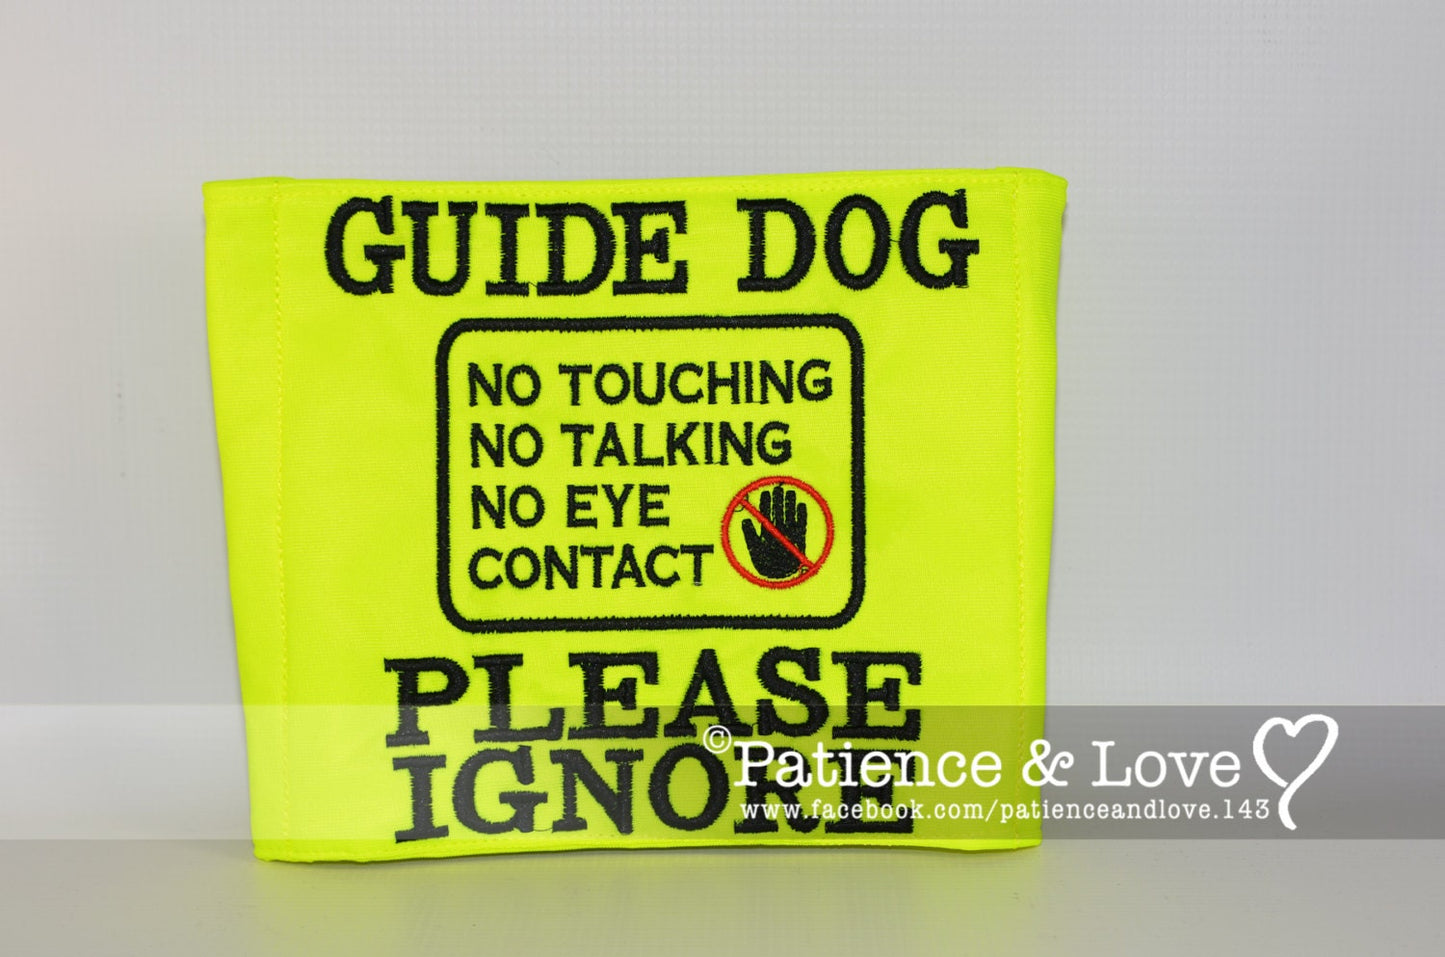 Guide Dog Please Ignore with No Touching No Talking No Eye Contact patch Harness Sign, Custom Embroidered